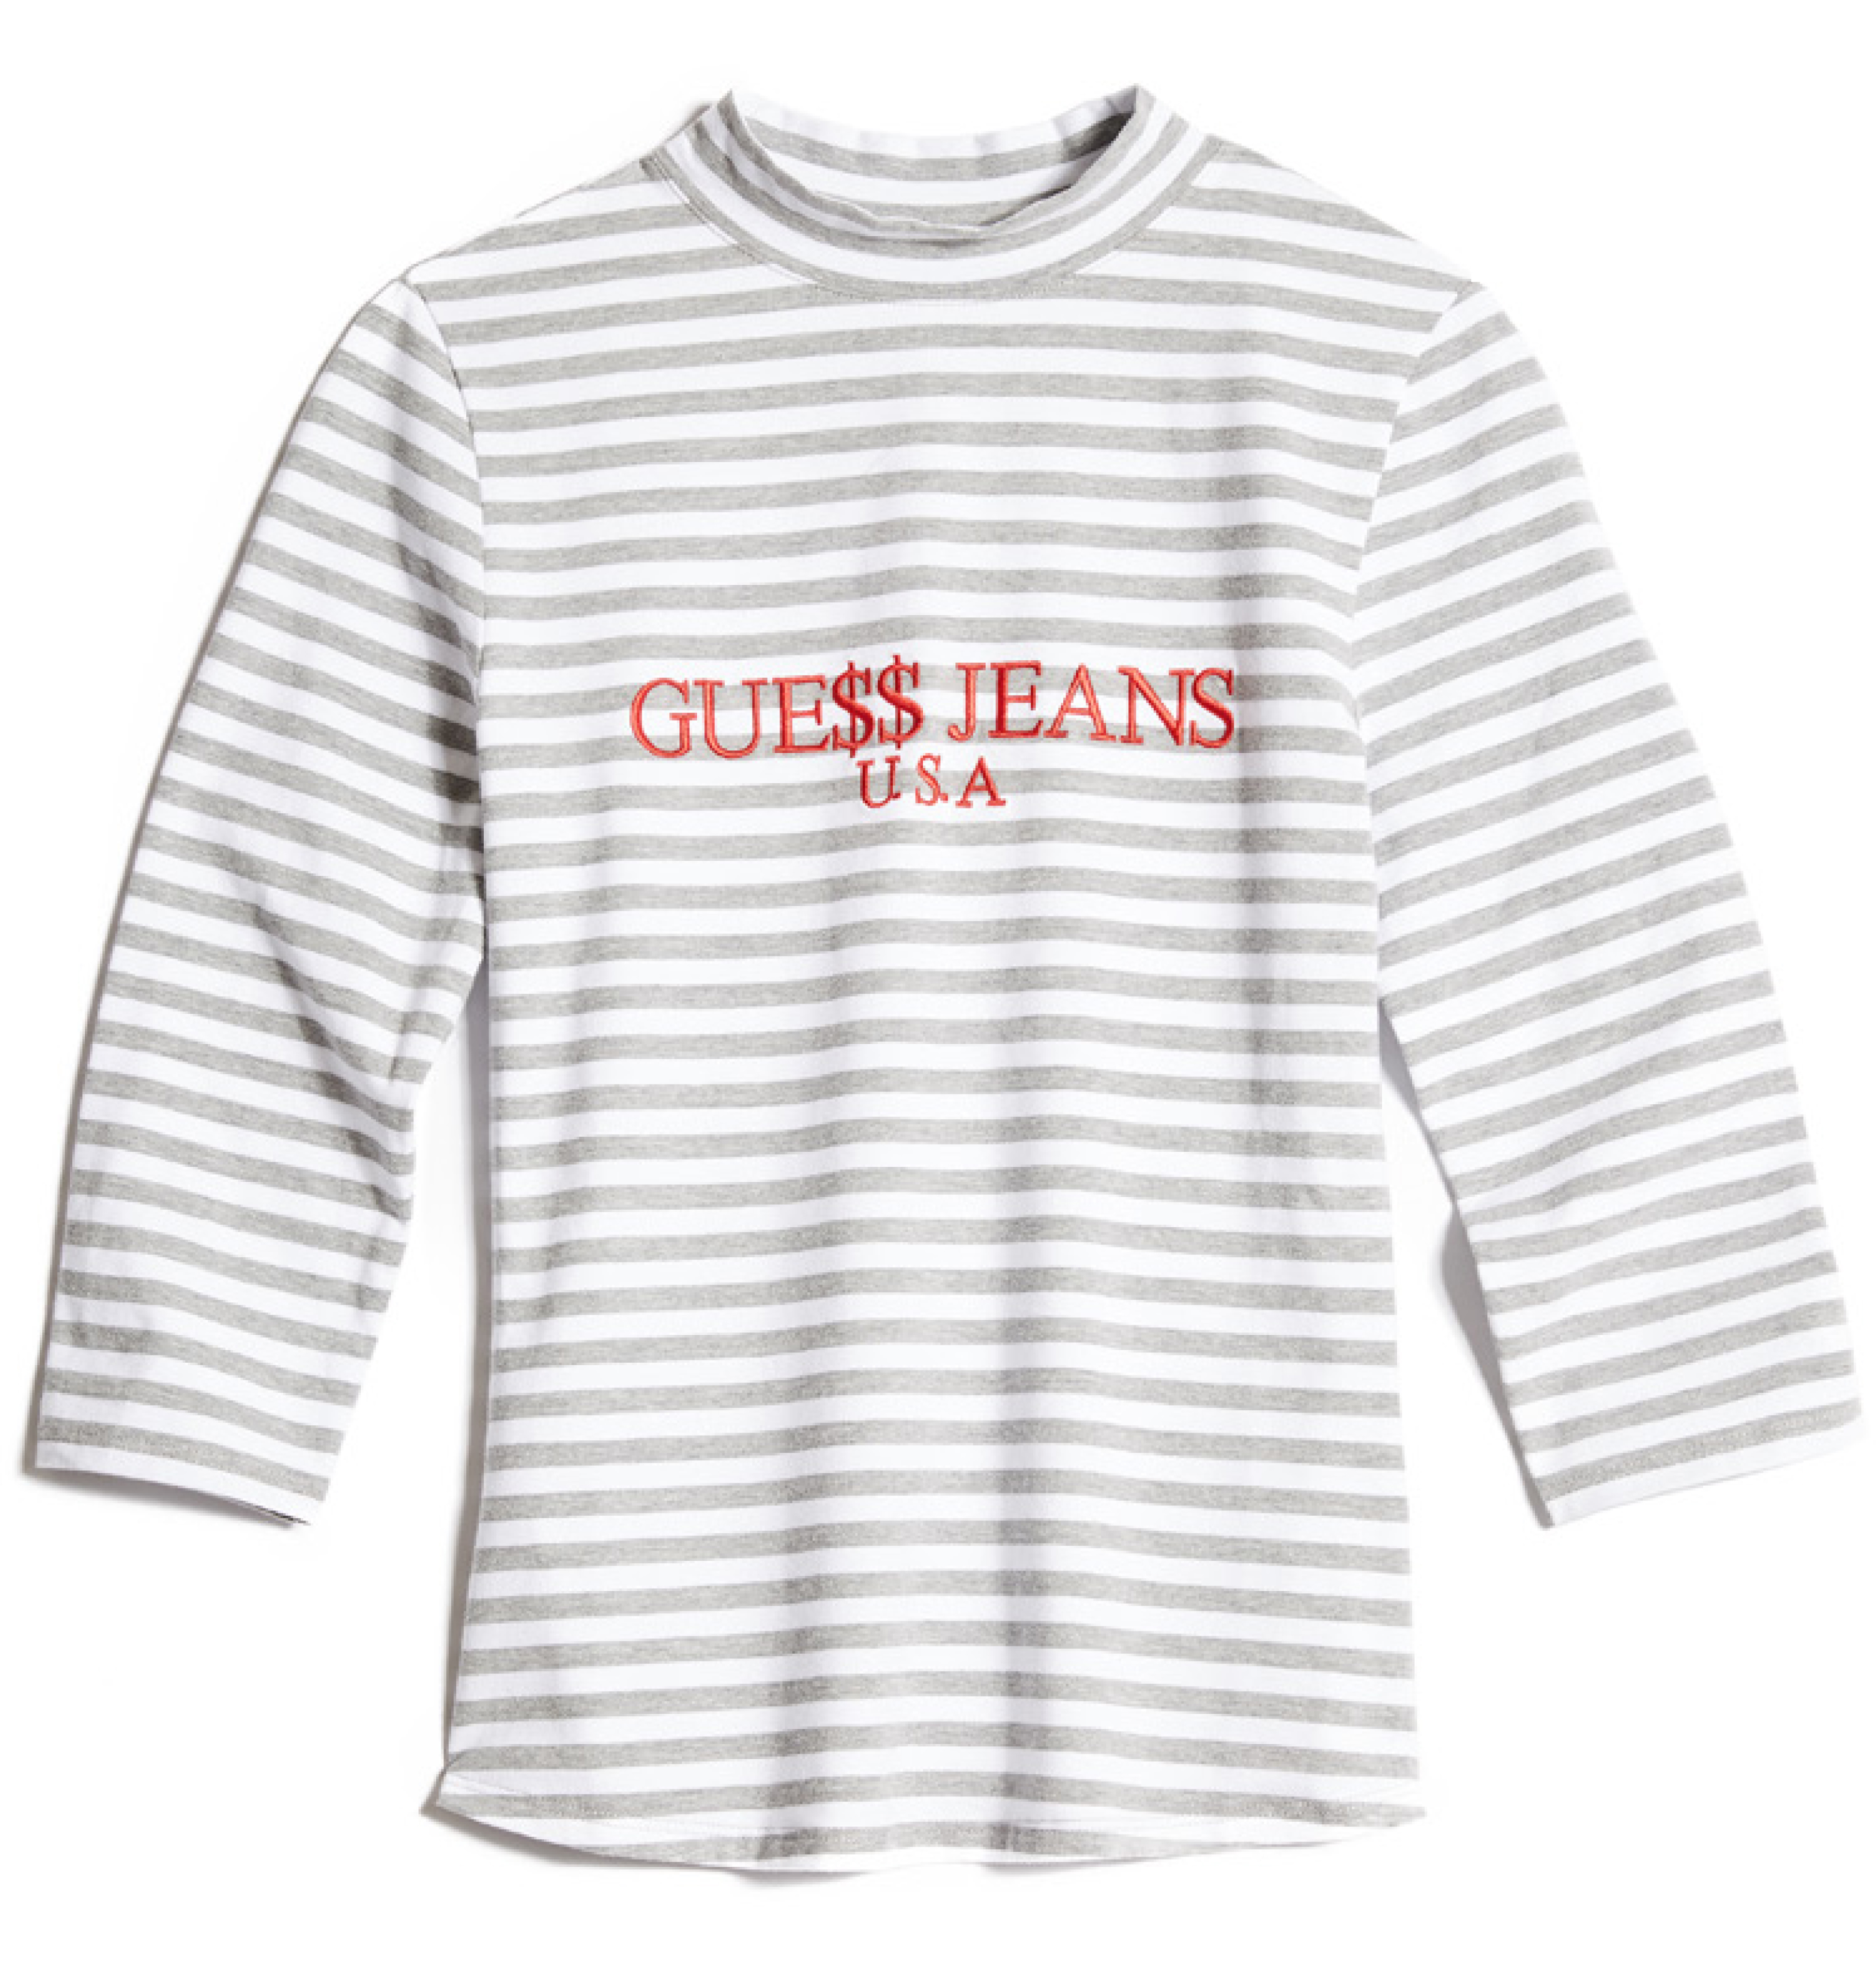 Guess asap rocky usa t shirt, Vans us open surfing t shirt, how does dsquared t shirt fit. 